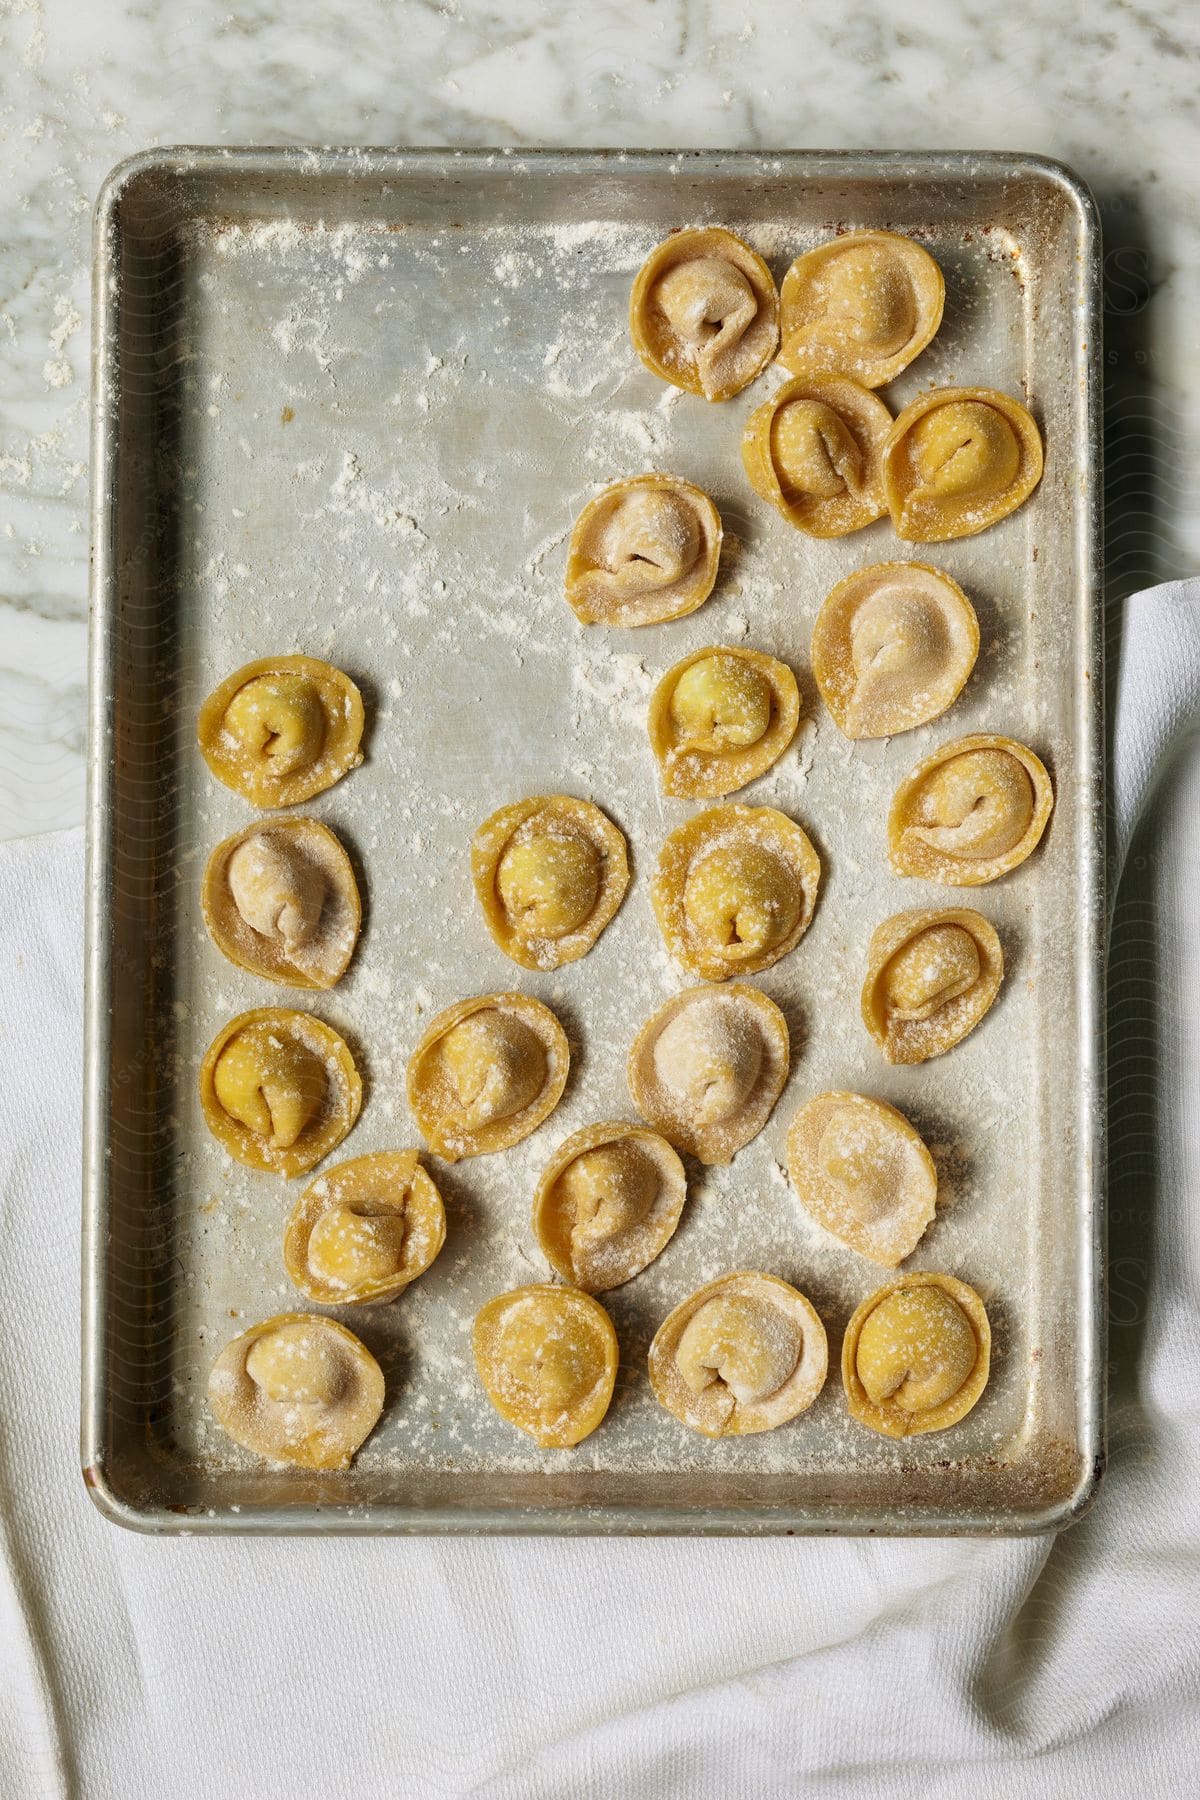 Stock photo of a neutral pastry on a golden plate in a kitchen pan